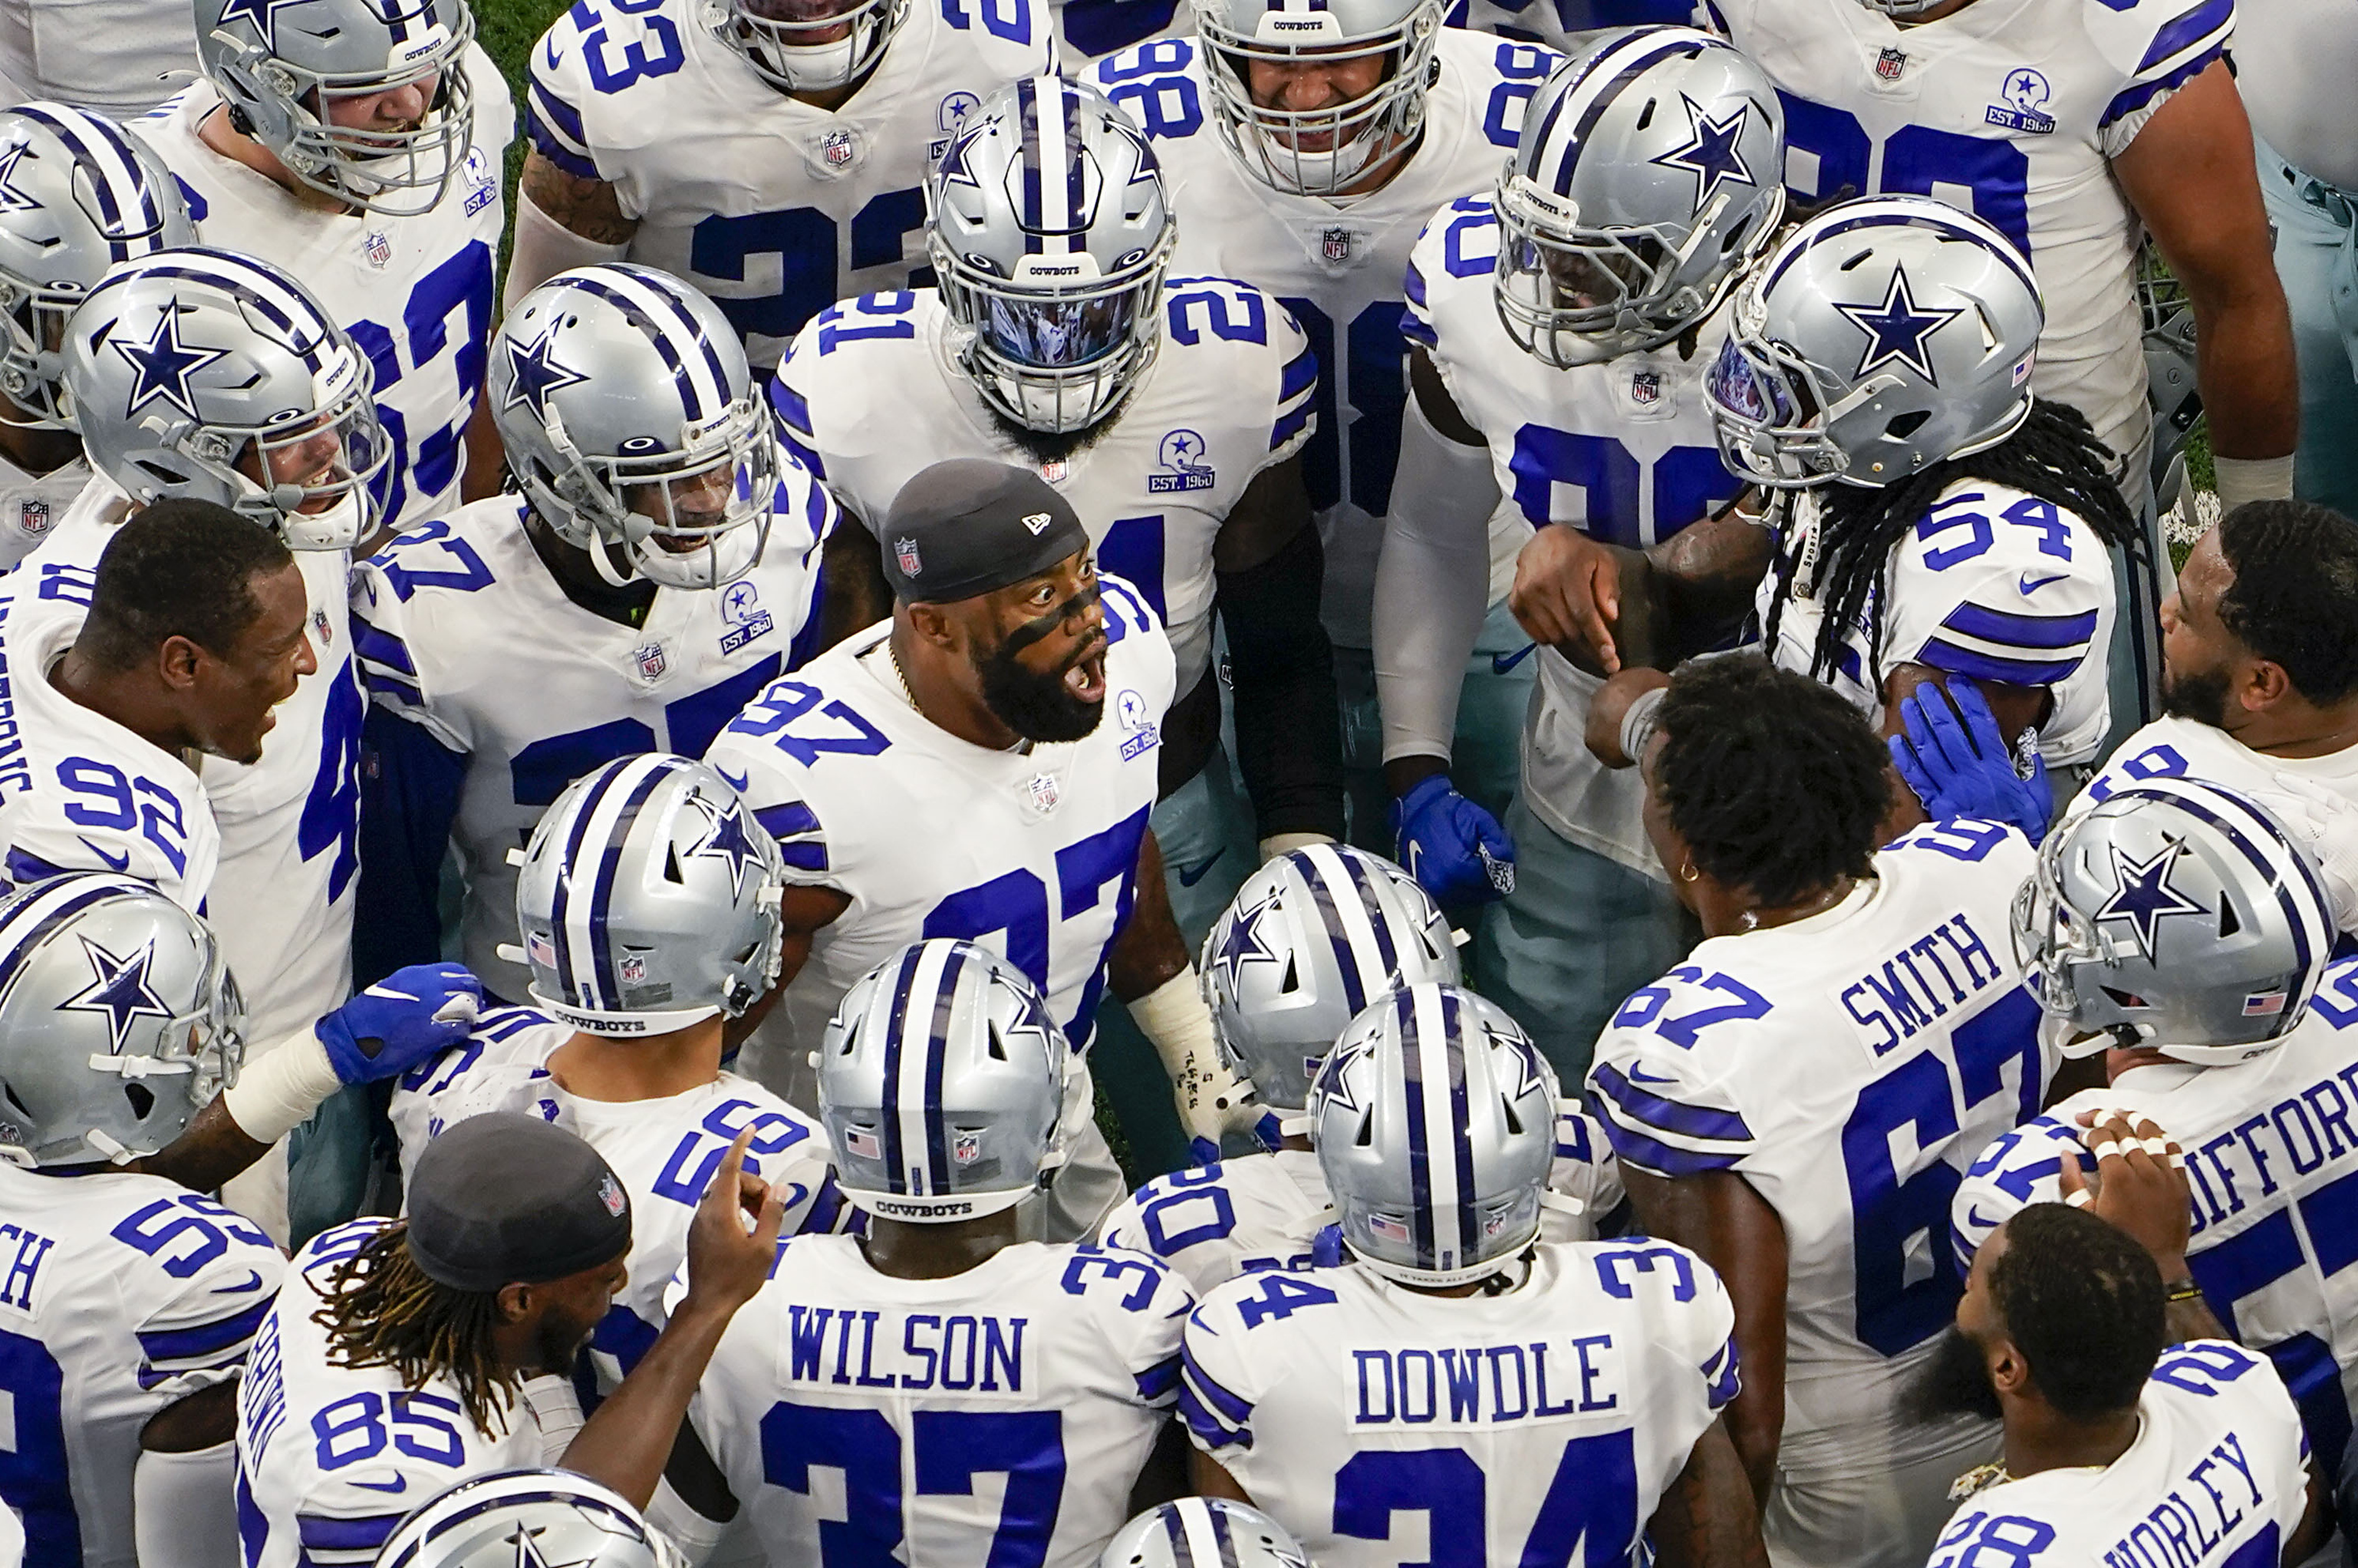 We weren't supposed to win': How the Cowboys mounted one of the